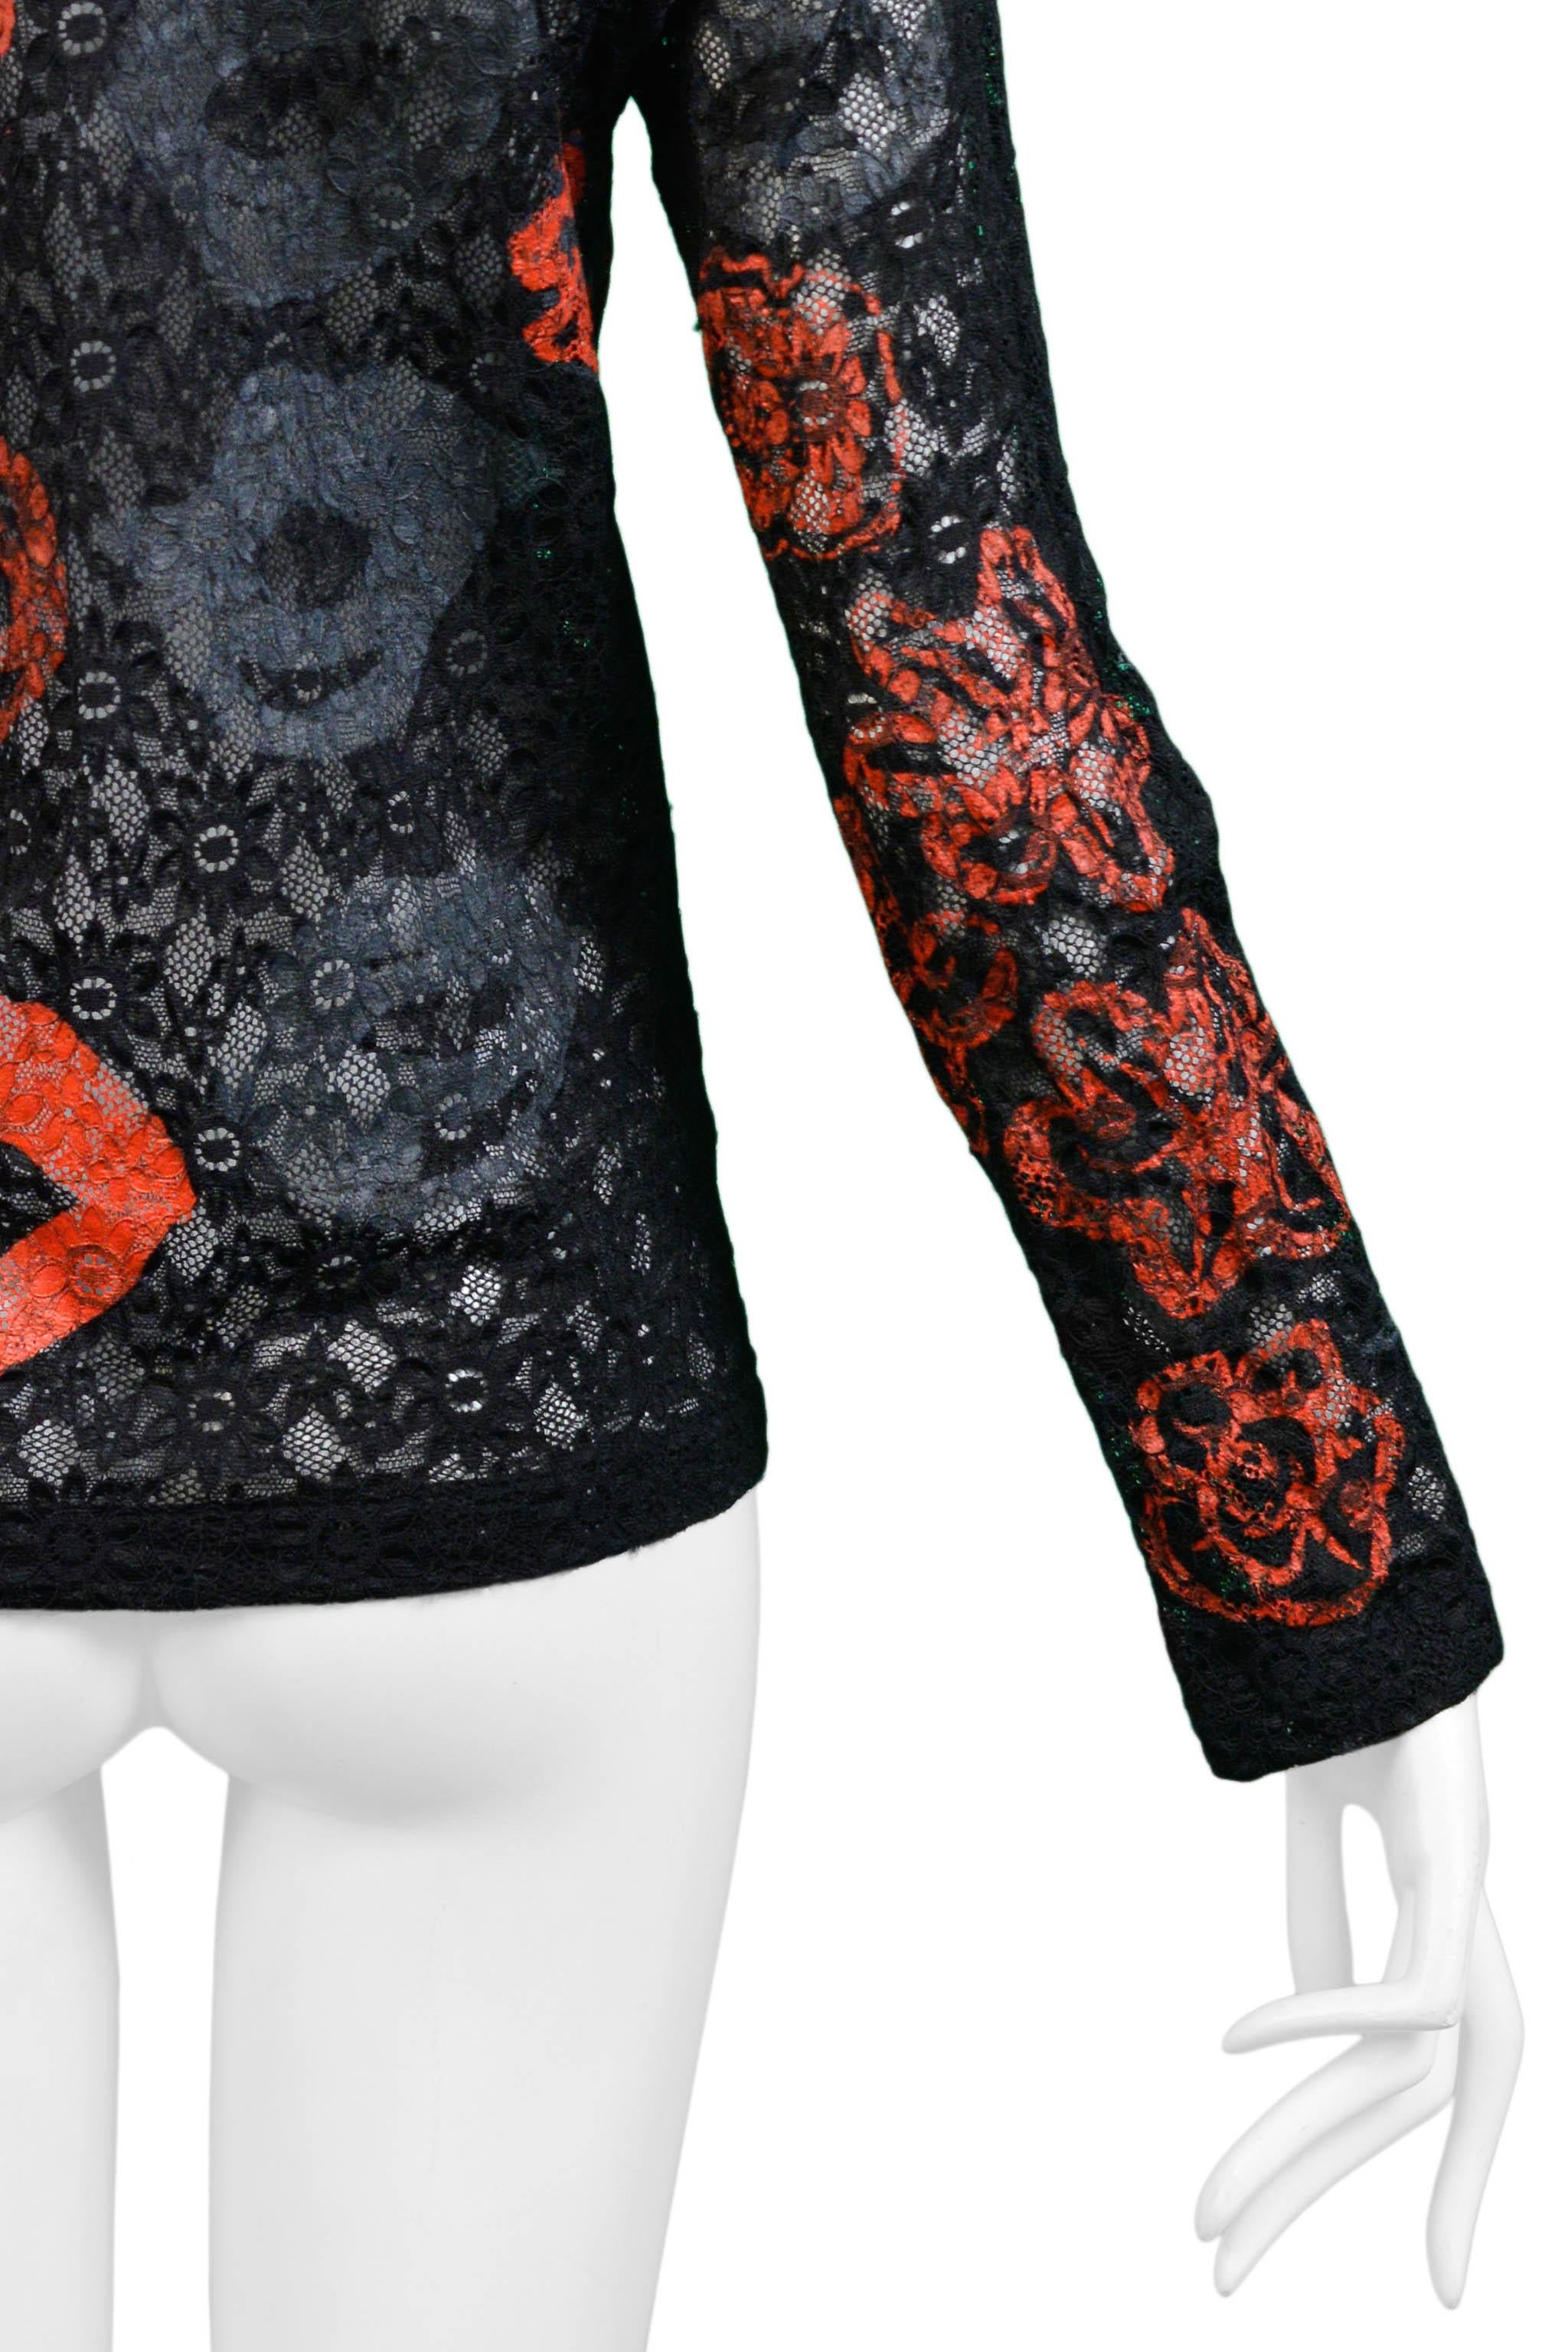 Comme Des Garcons Black Red & Grey Printed Lace Top 2000 For Sale 1